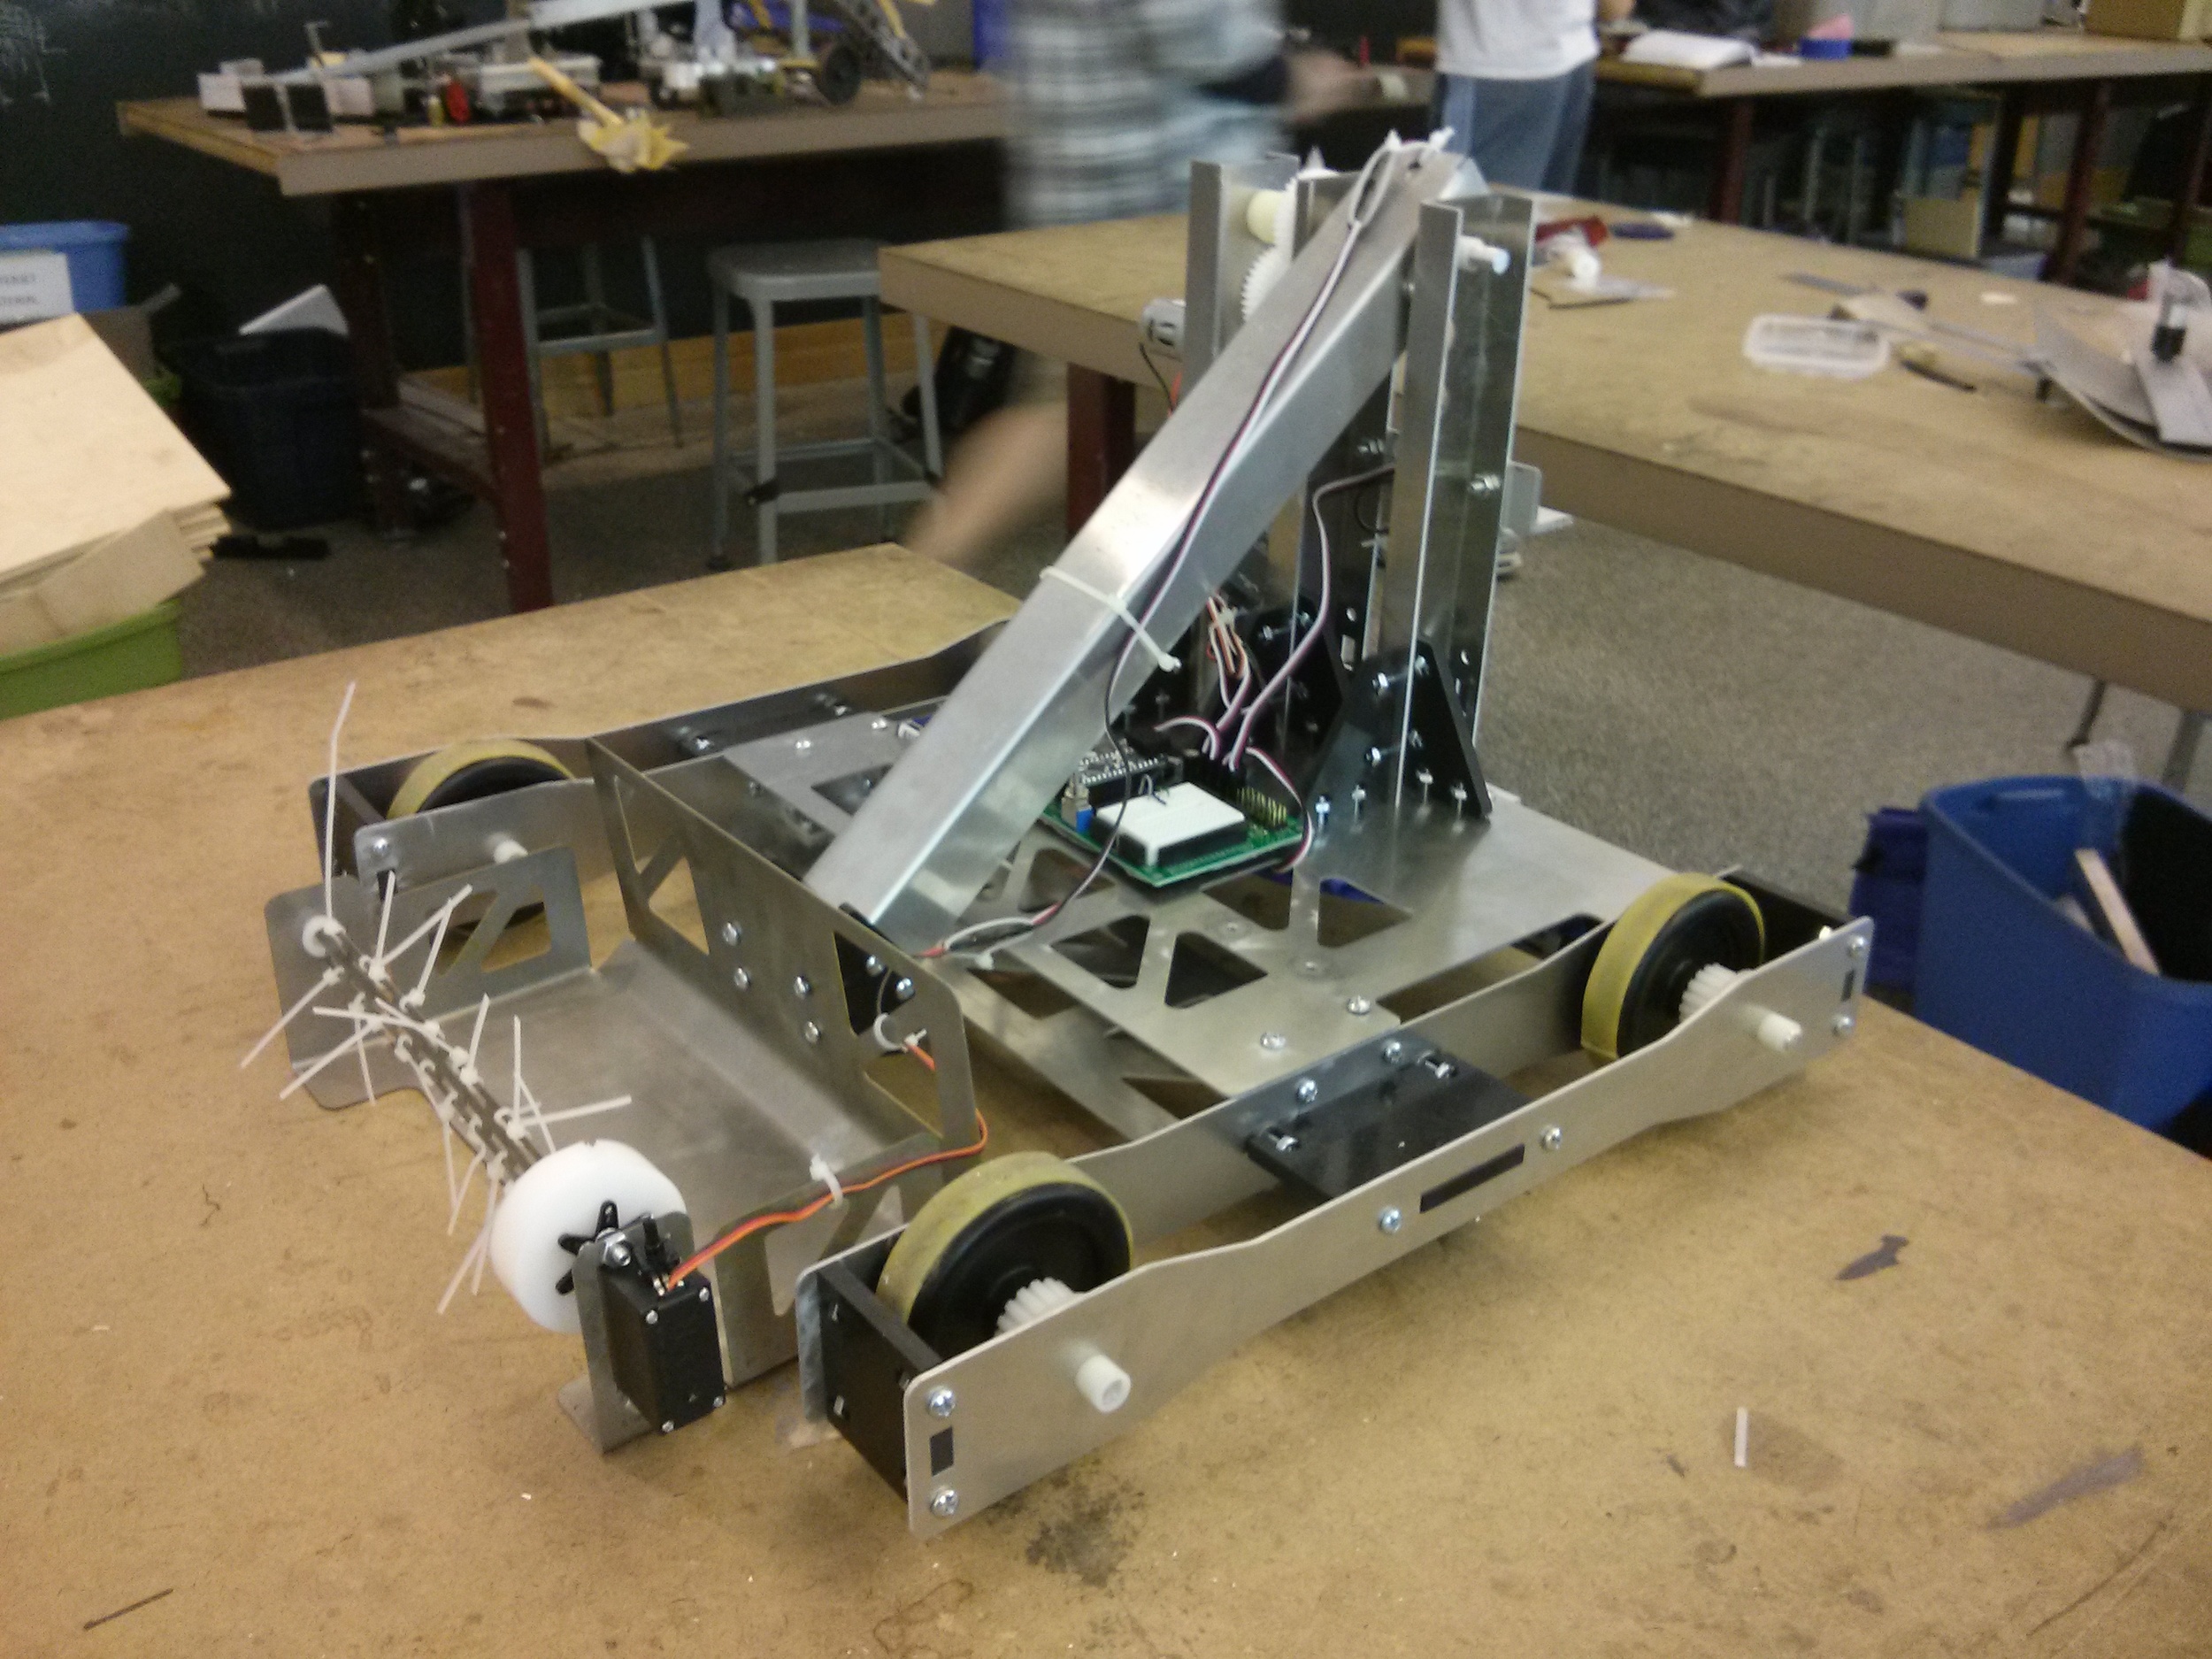  The final assembly of the robot was relatively straight-forward due to planning and designing that was already done in CAD. 